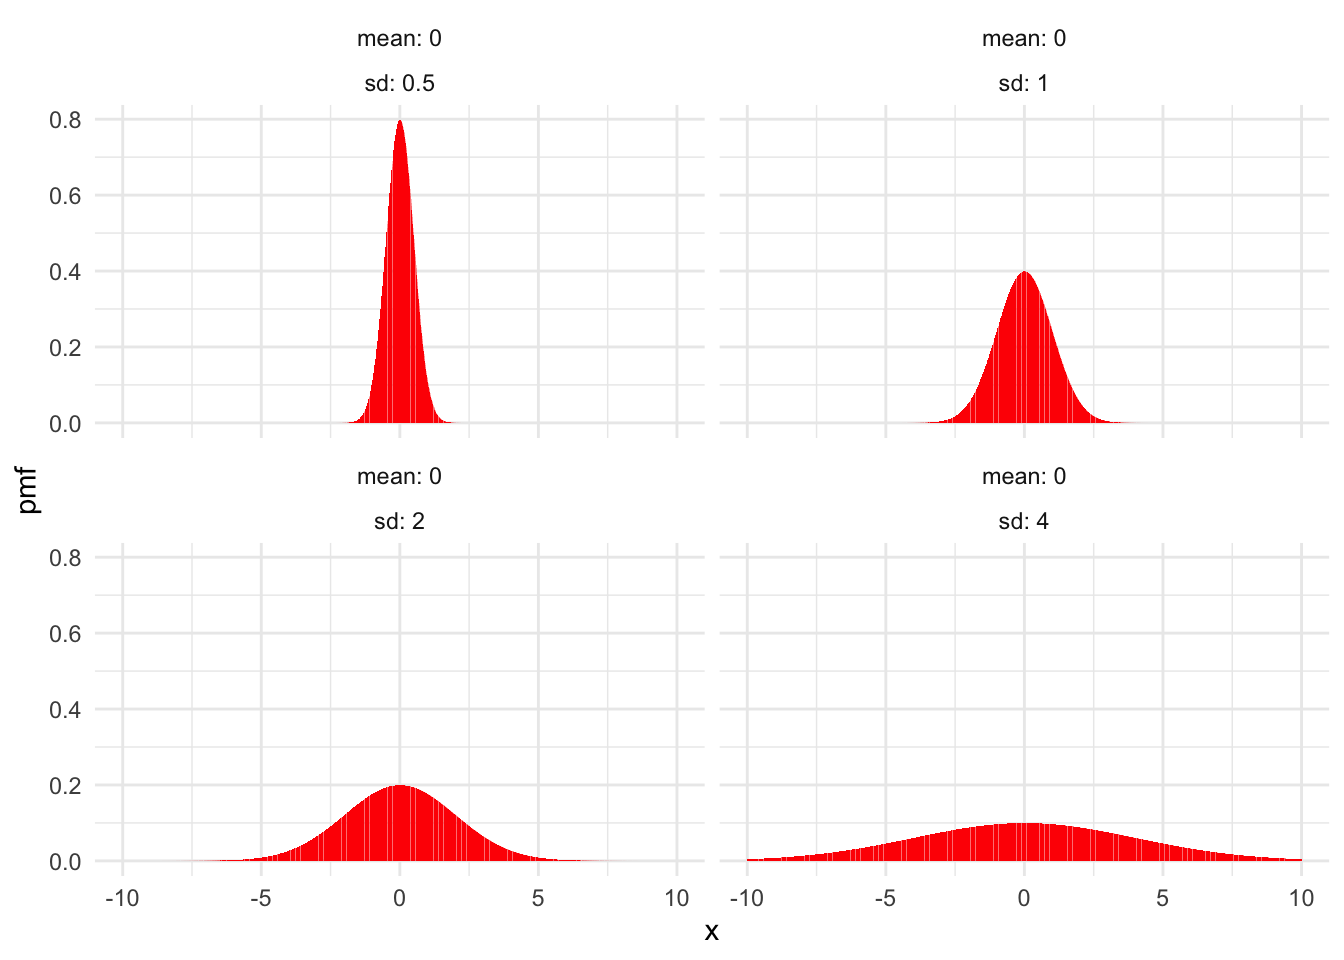 Normal distributions with $\mu = 0$ and various values of $\sigma$.